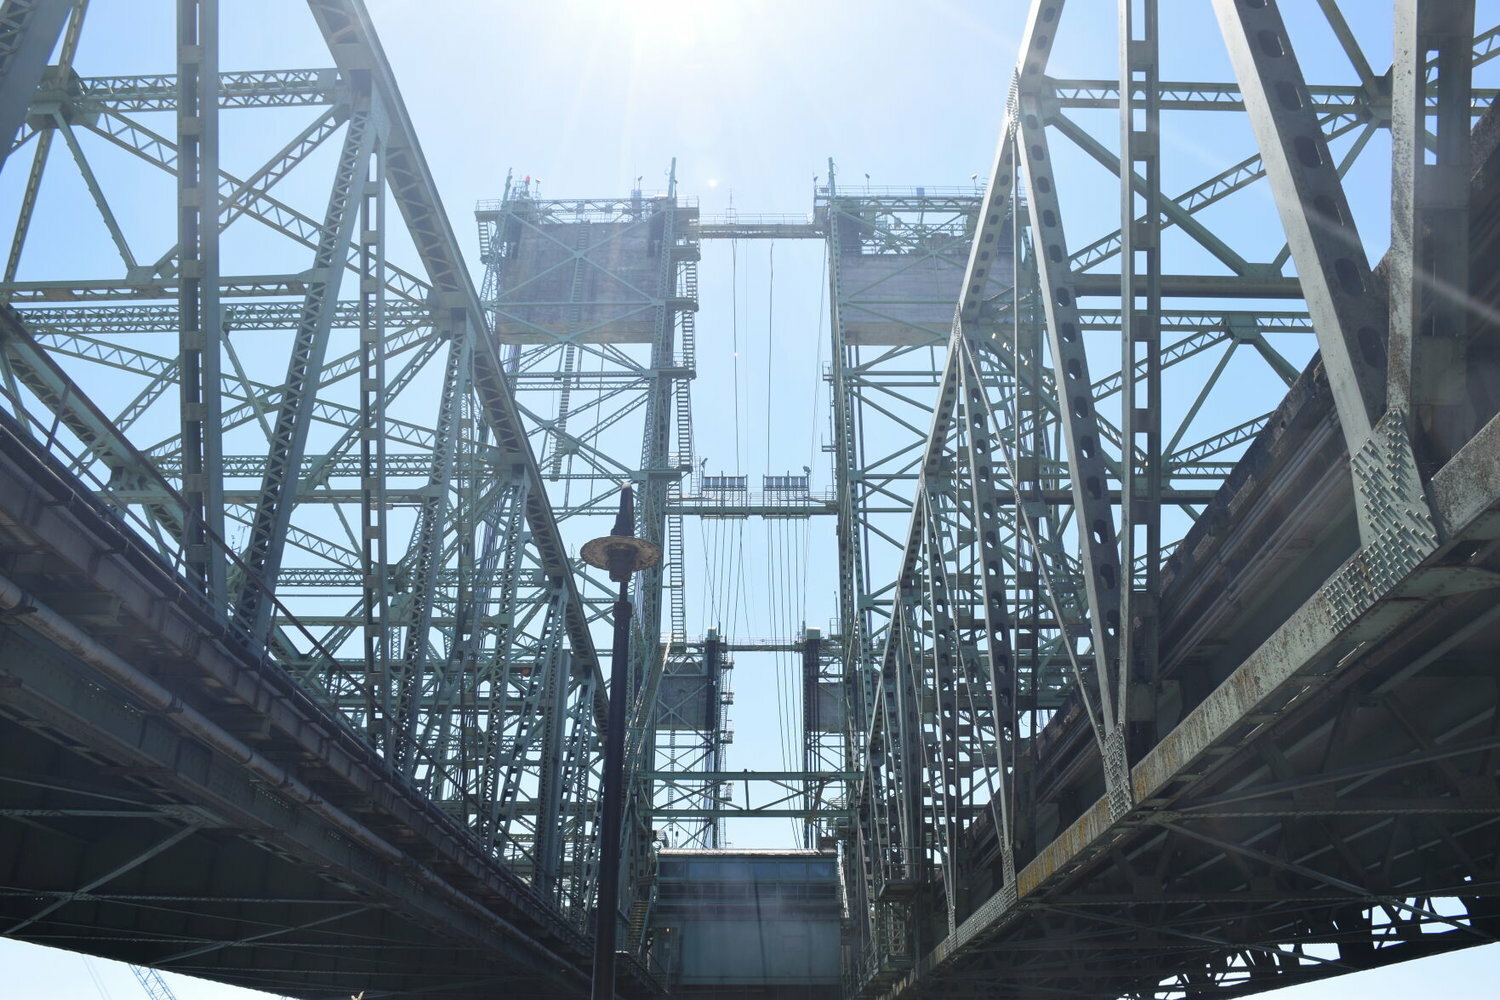 The I-5 Bridge Replacement Program received $600 million in funding during 2023 and established tolling laws, which will fund the replacement of the aging structure.